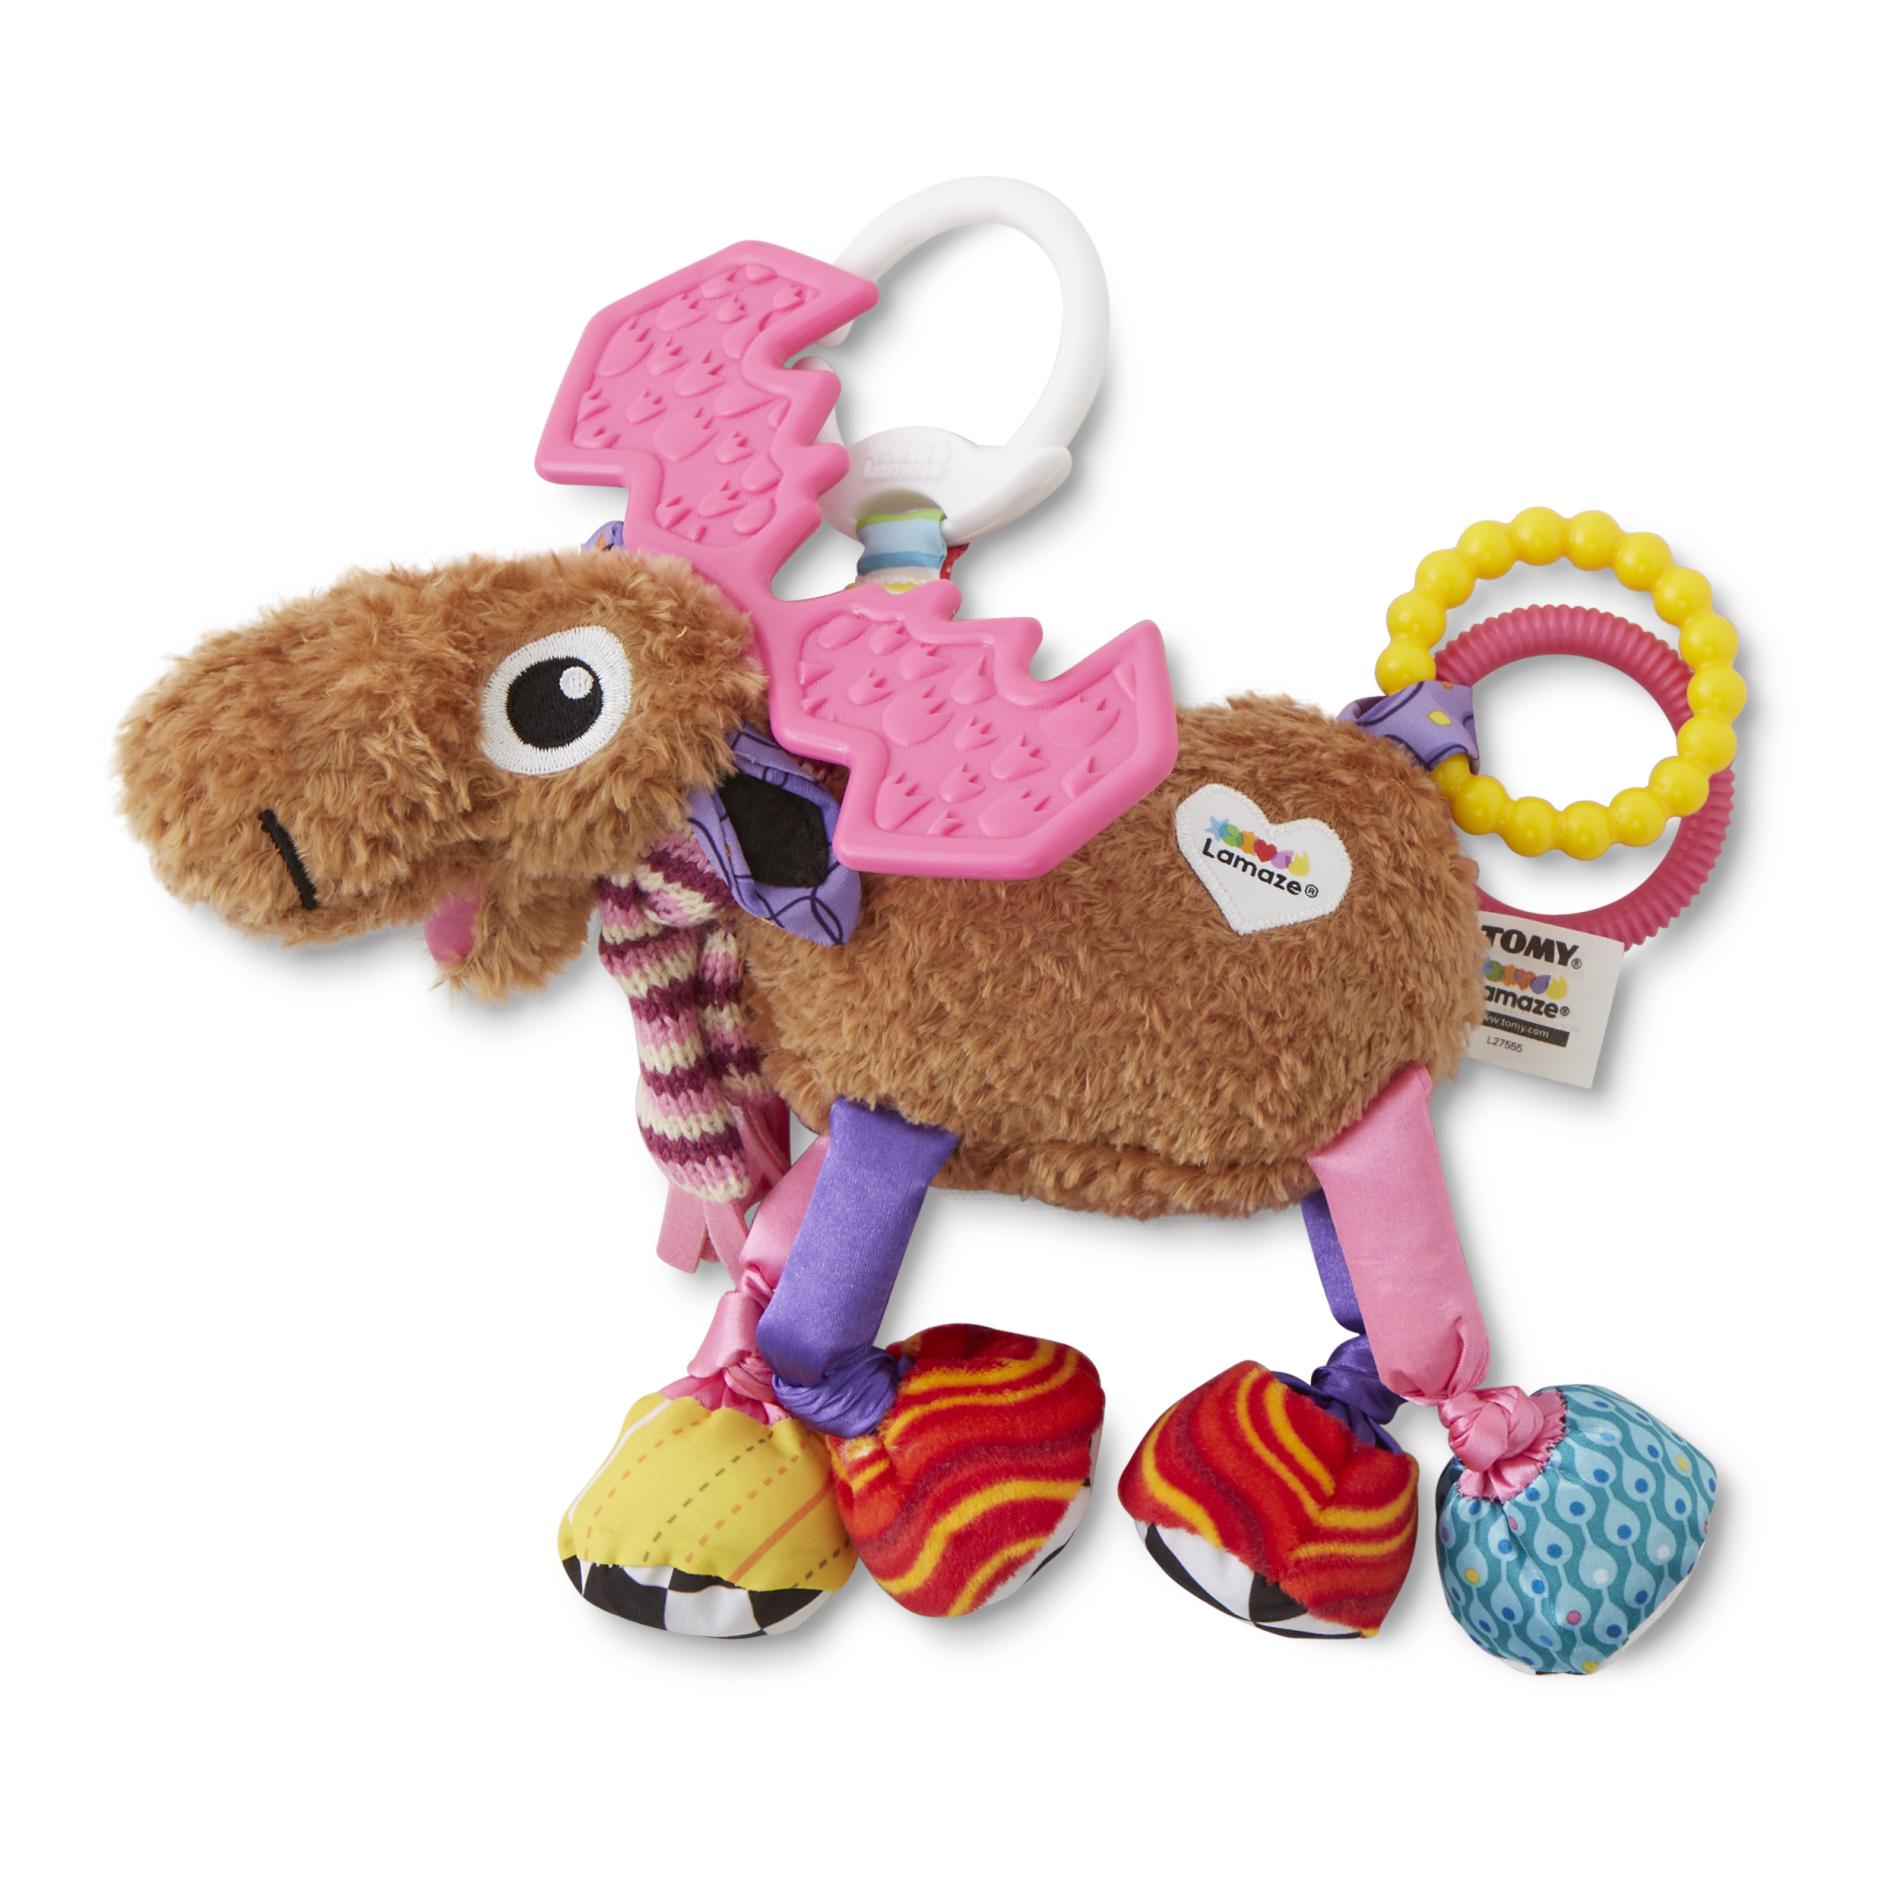 Lamaze Infants' Clip & Play Toy - Muffin The Moose